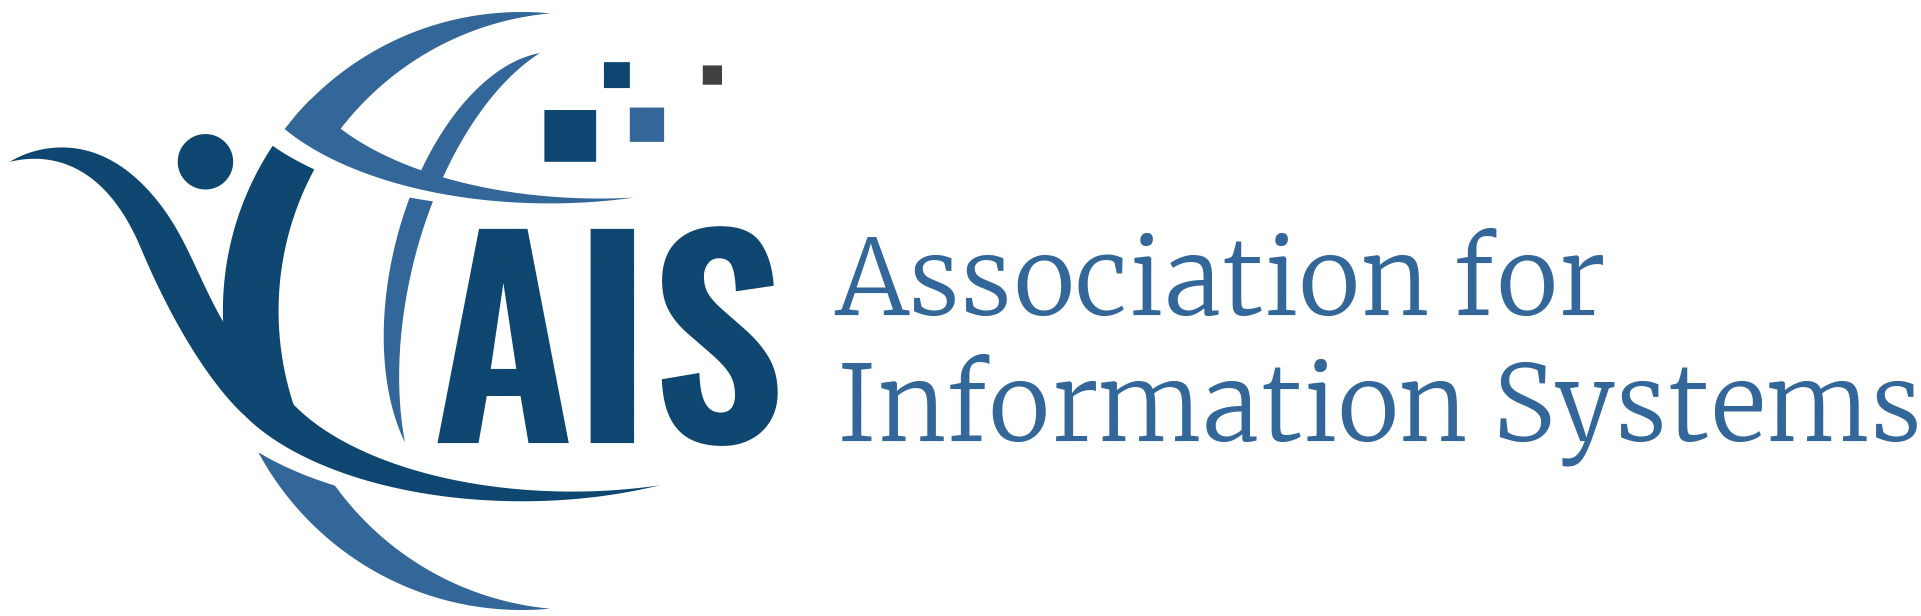 An Affiliated Conference of the Association for Information Systems